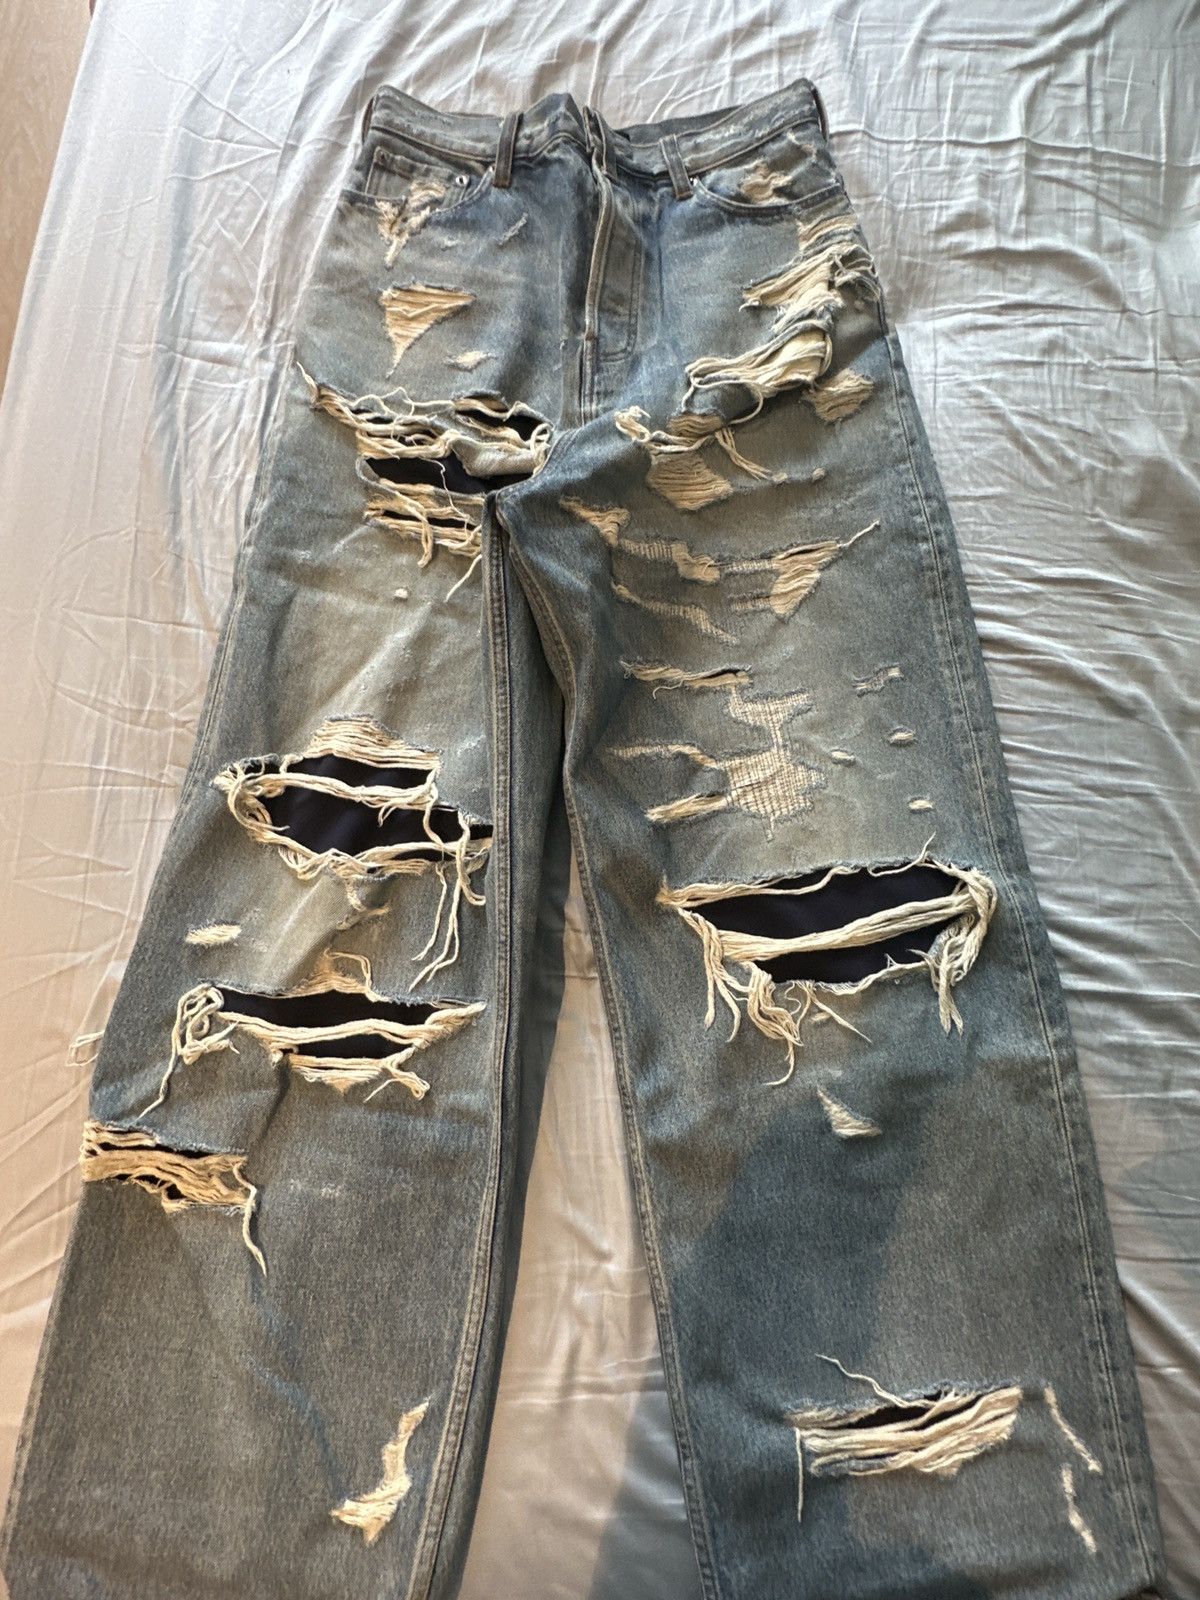 FS] [WAREHOUSE] GODBLESS BALENCIAGA DESTROYED JEANS SIZE M